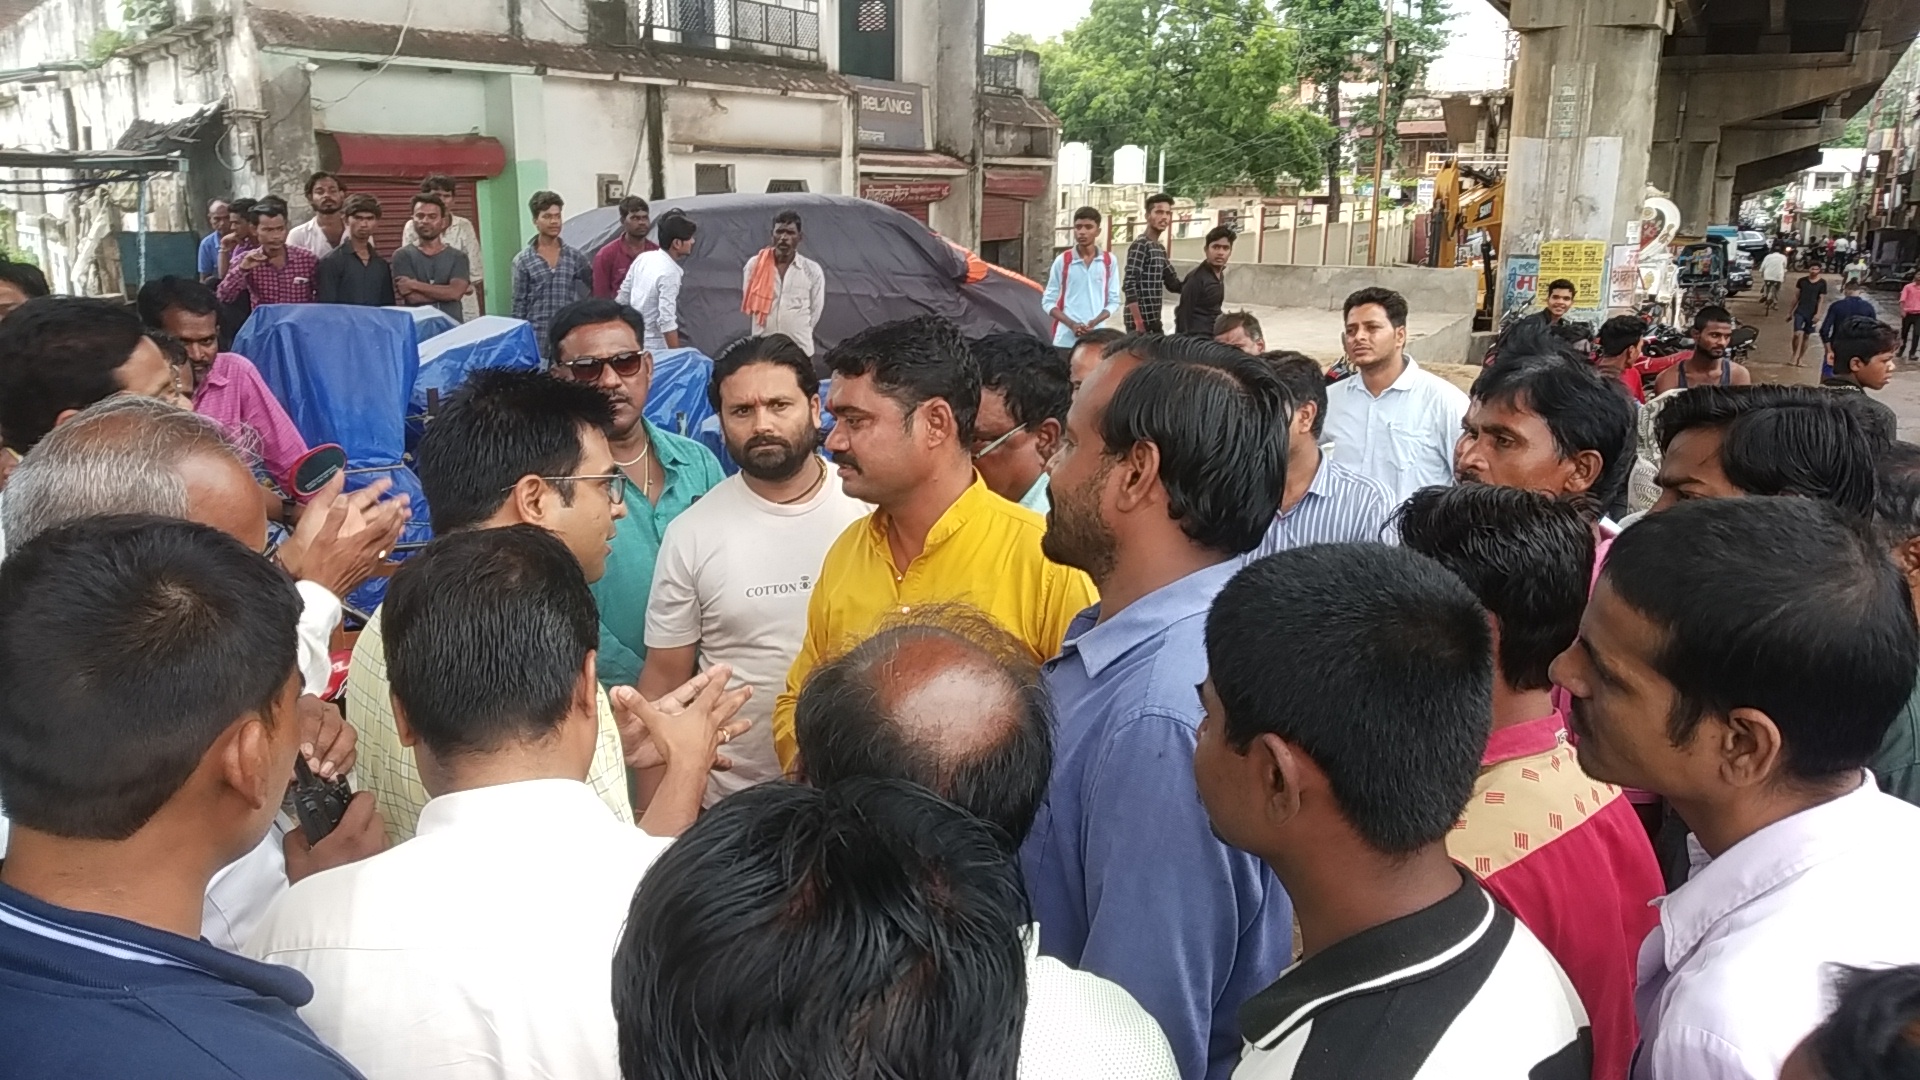 People protested against the construction of sewer